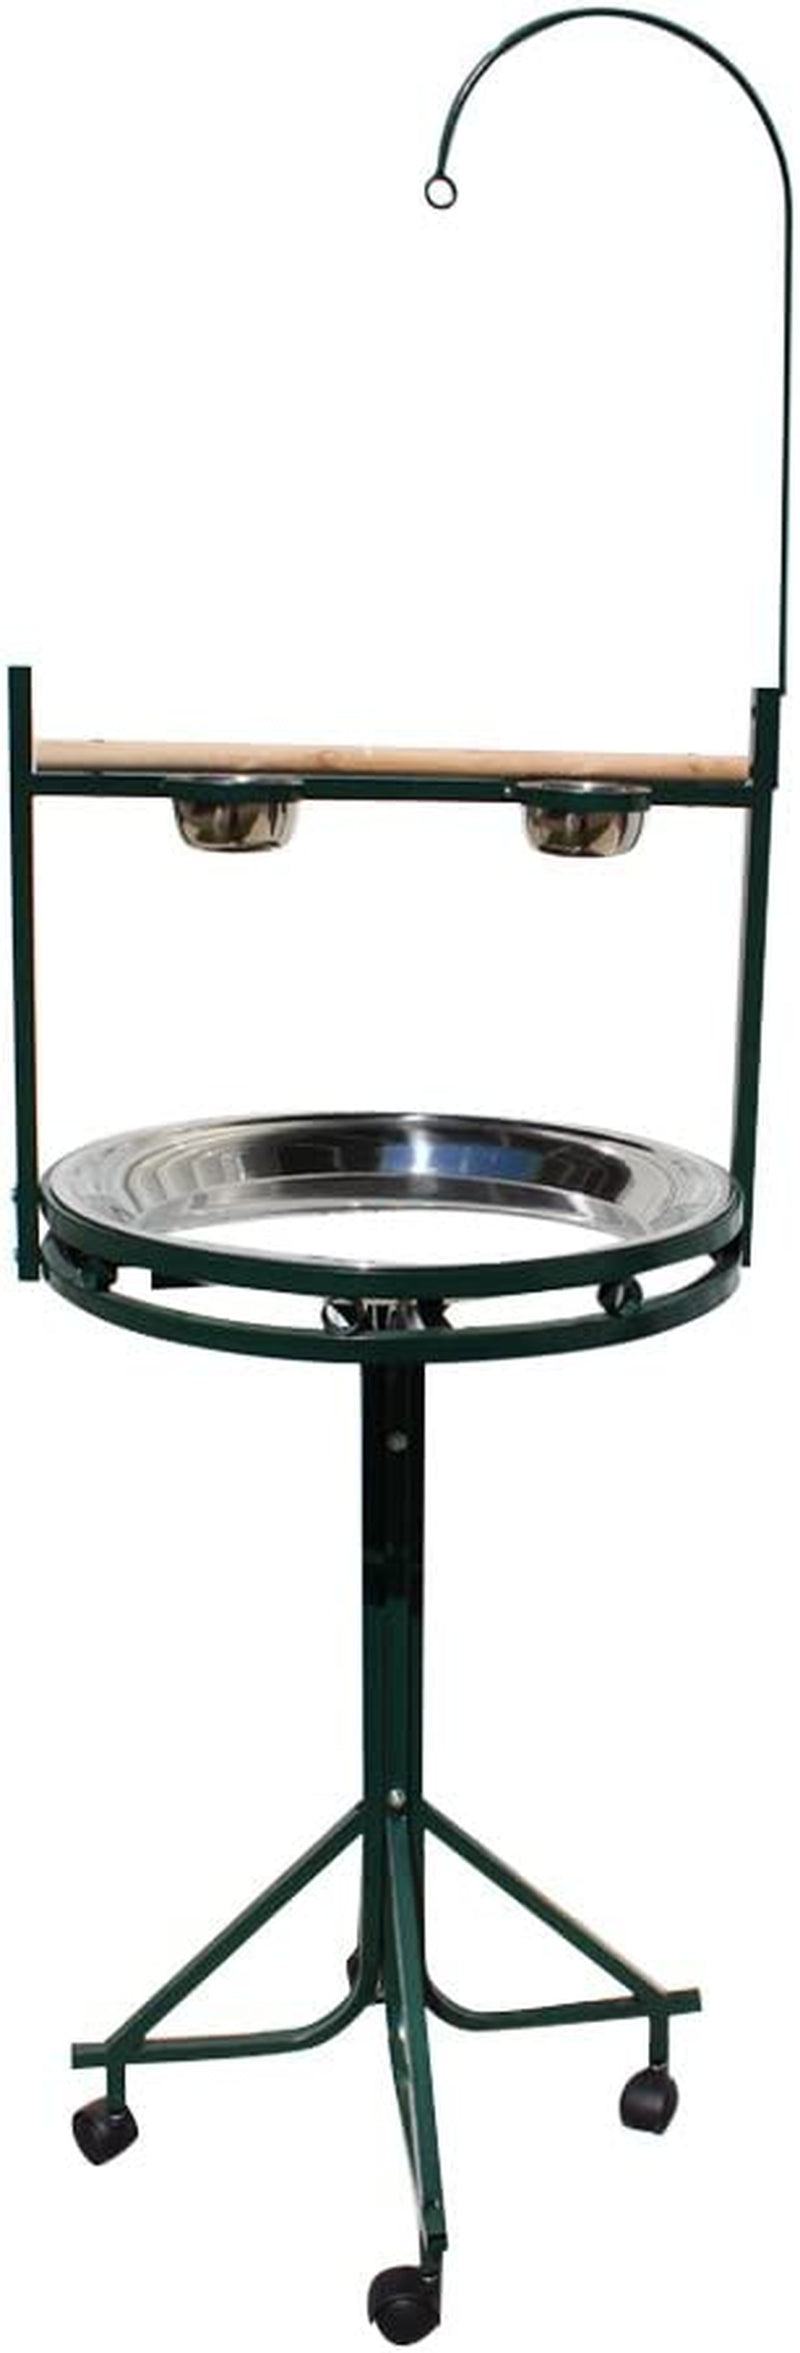 Birds LOVE Stainless Steel Tray, Non-Toxic, Powder Coated Parrot Playstand with Perch, Toy Hook and Stainless Steel Cups (Green)